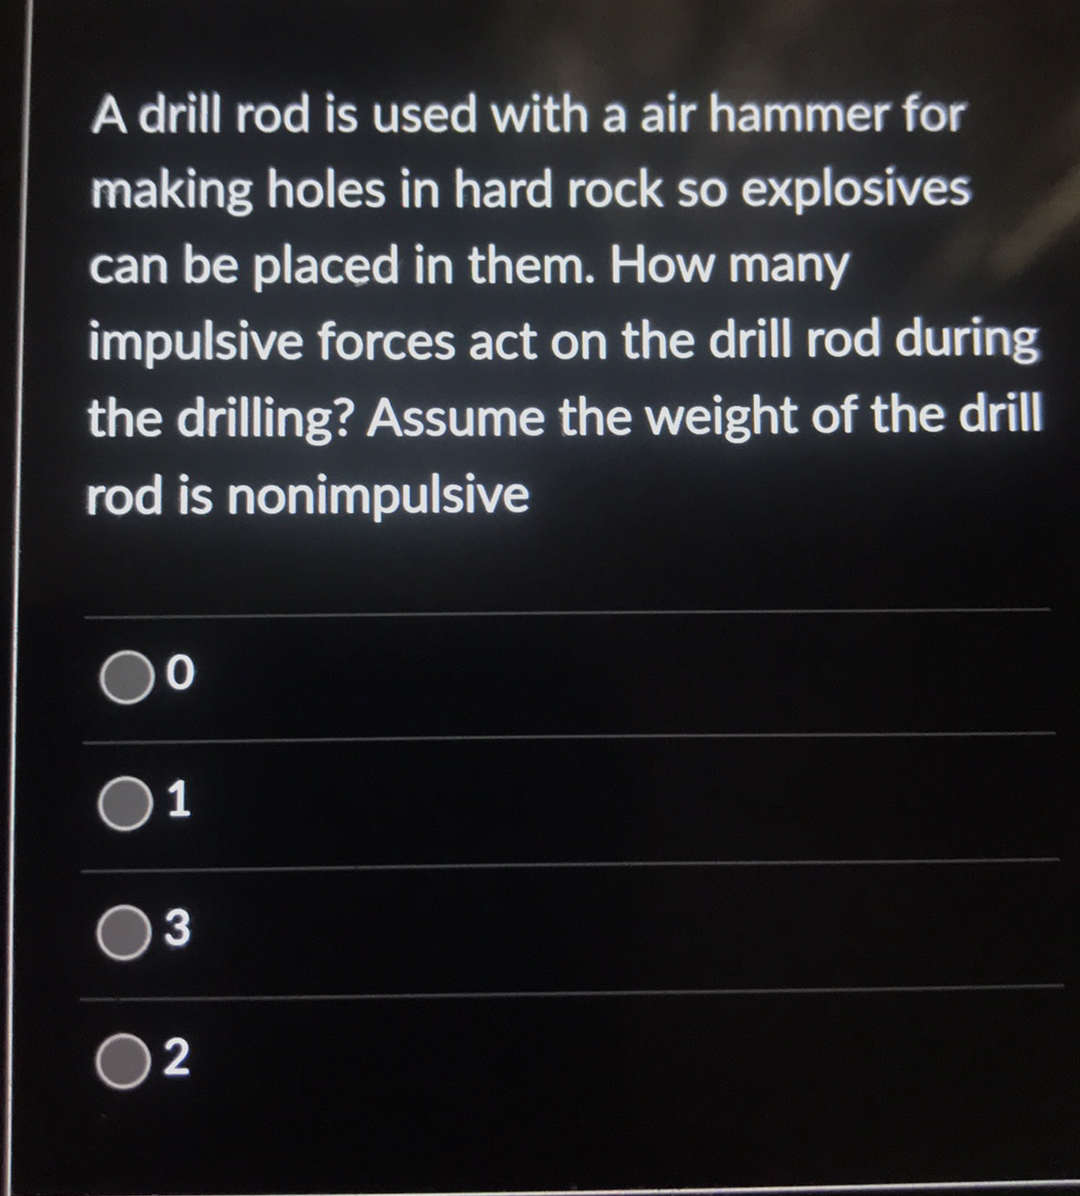 A drill rod is used with a air hammer for
making holes in hard rock so explosives
can be placed in them. How many
impulsive forces act on the drill rod during
the drilling? Assume the weight of the drill
rod is nonimpulsive
2
1,
